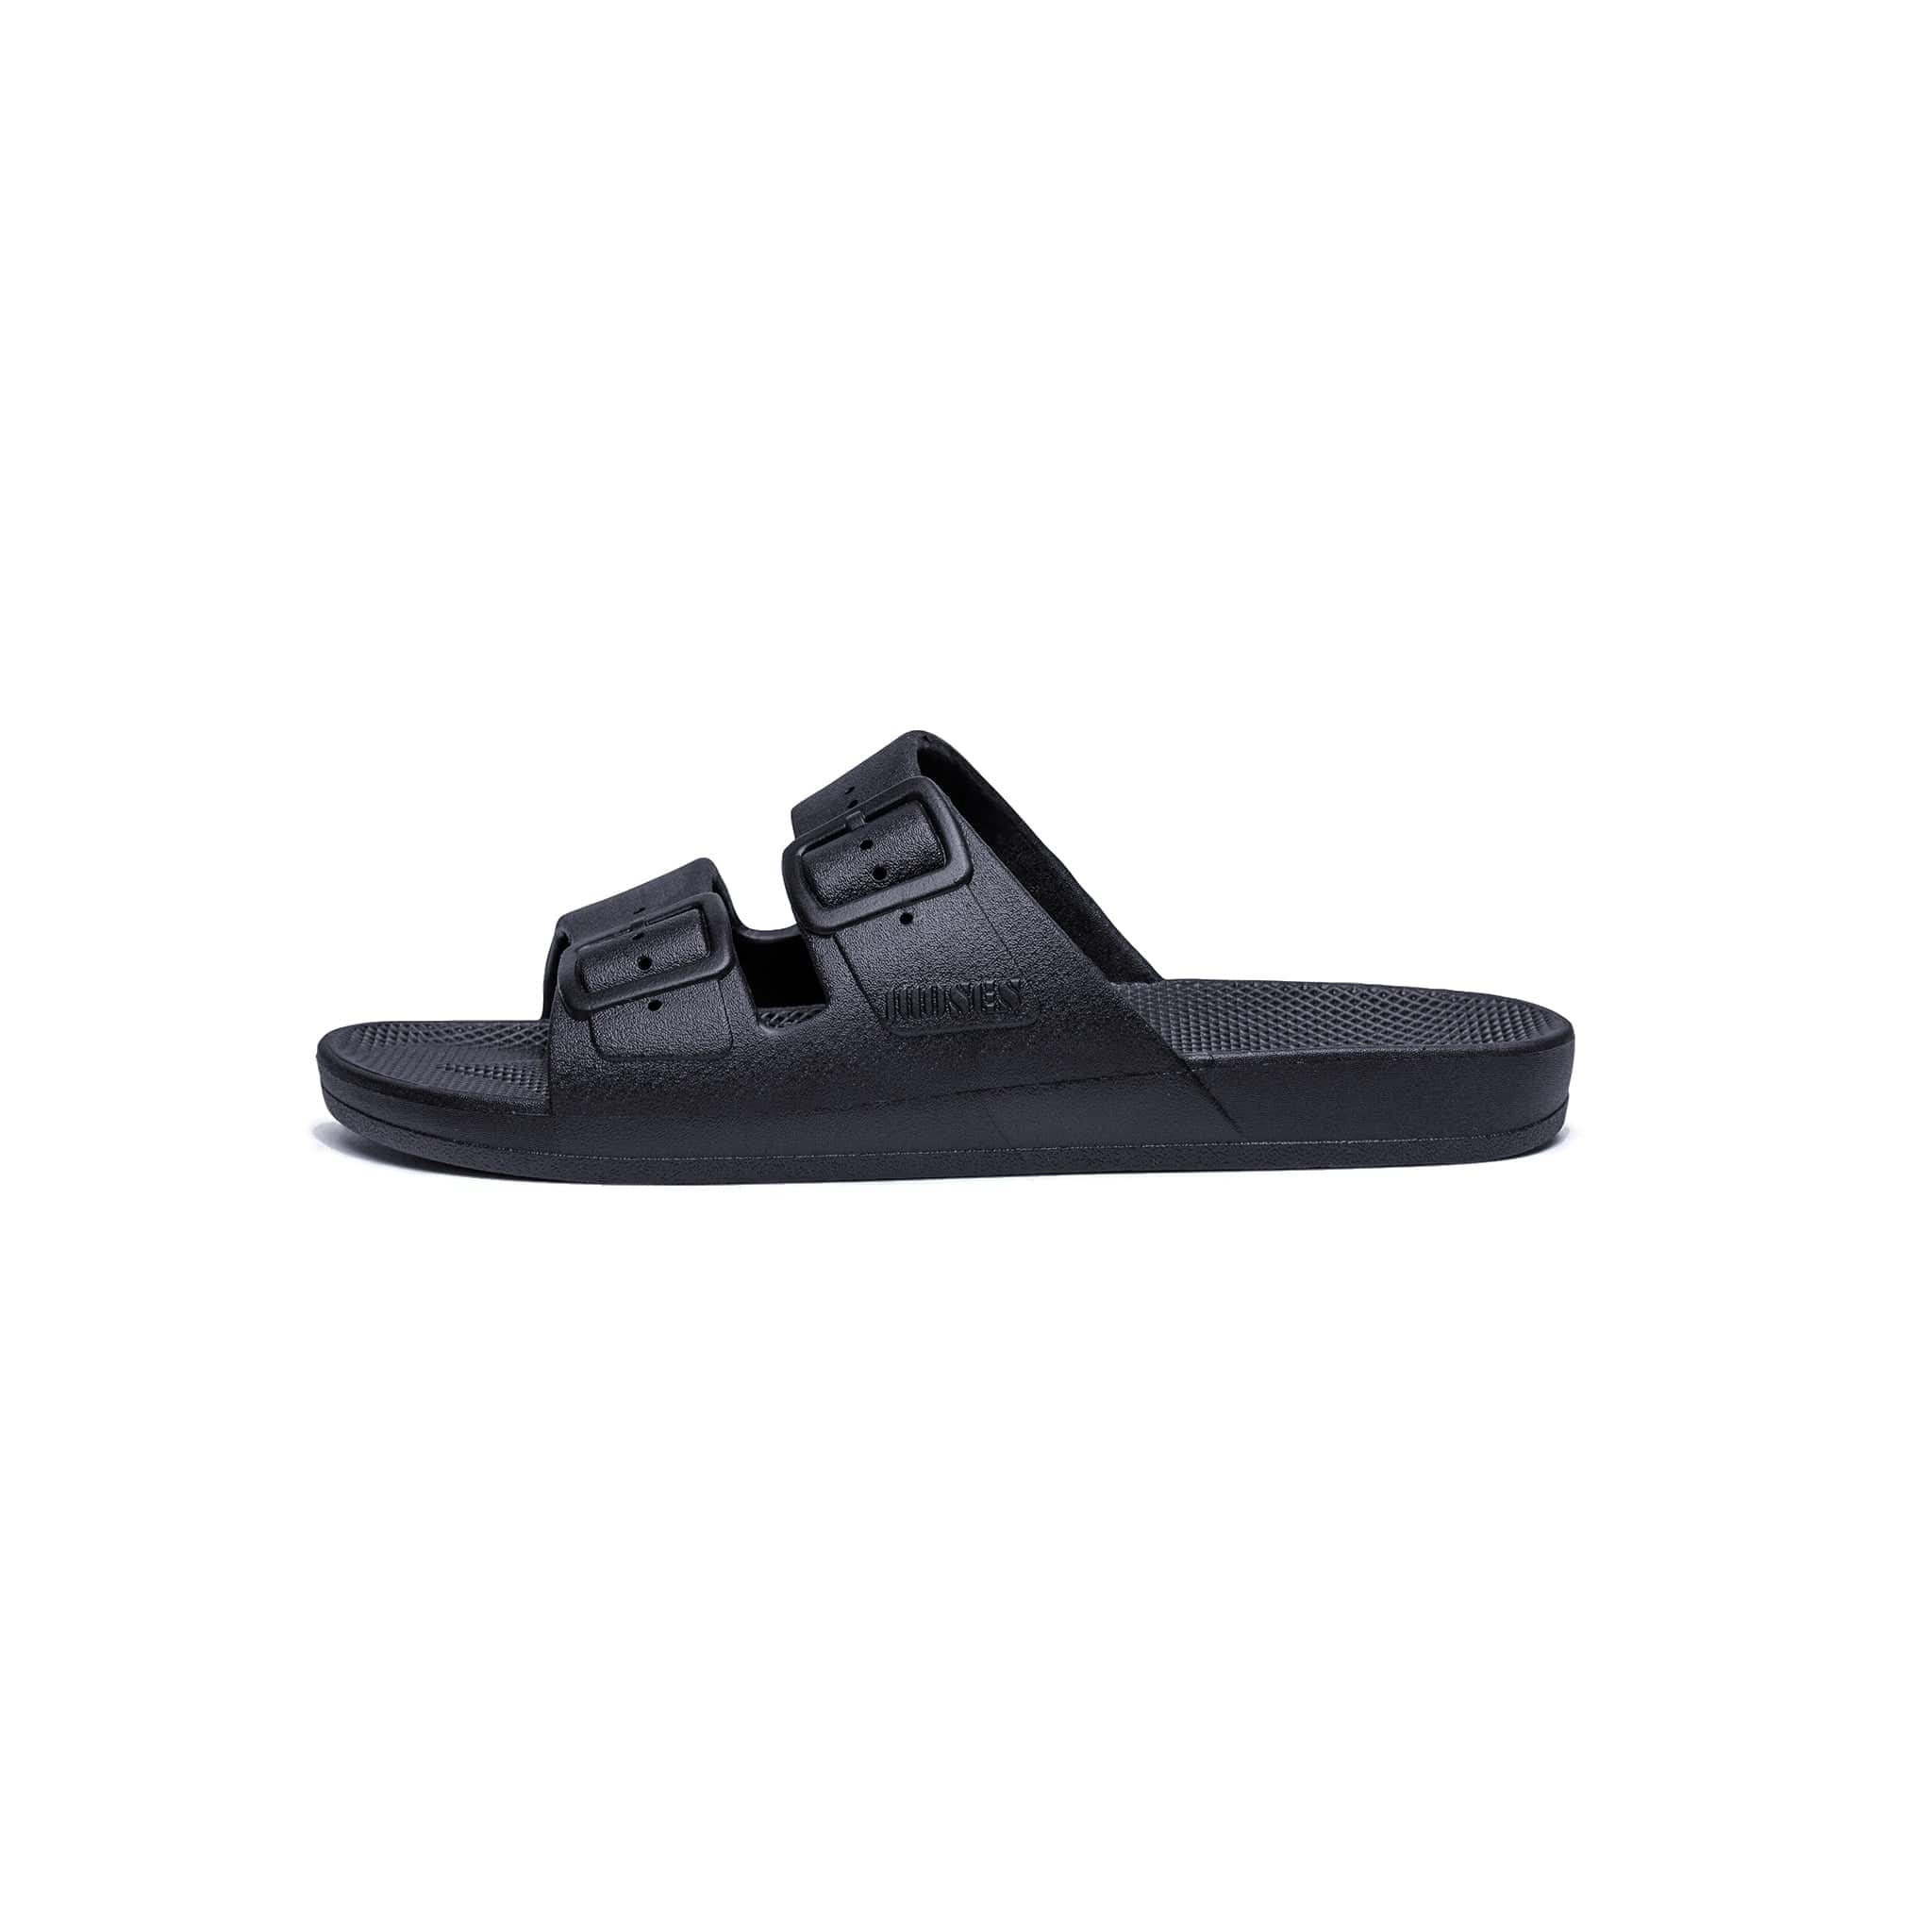 Freedom Moses Apparel & Accessories Freedom Moses - Fancy Slipper (Sandal)